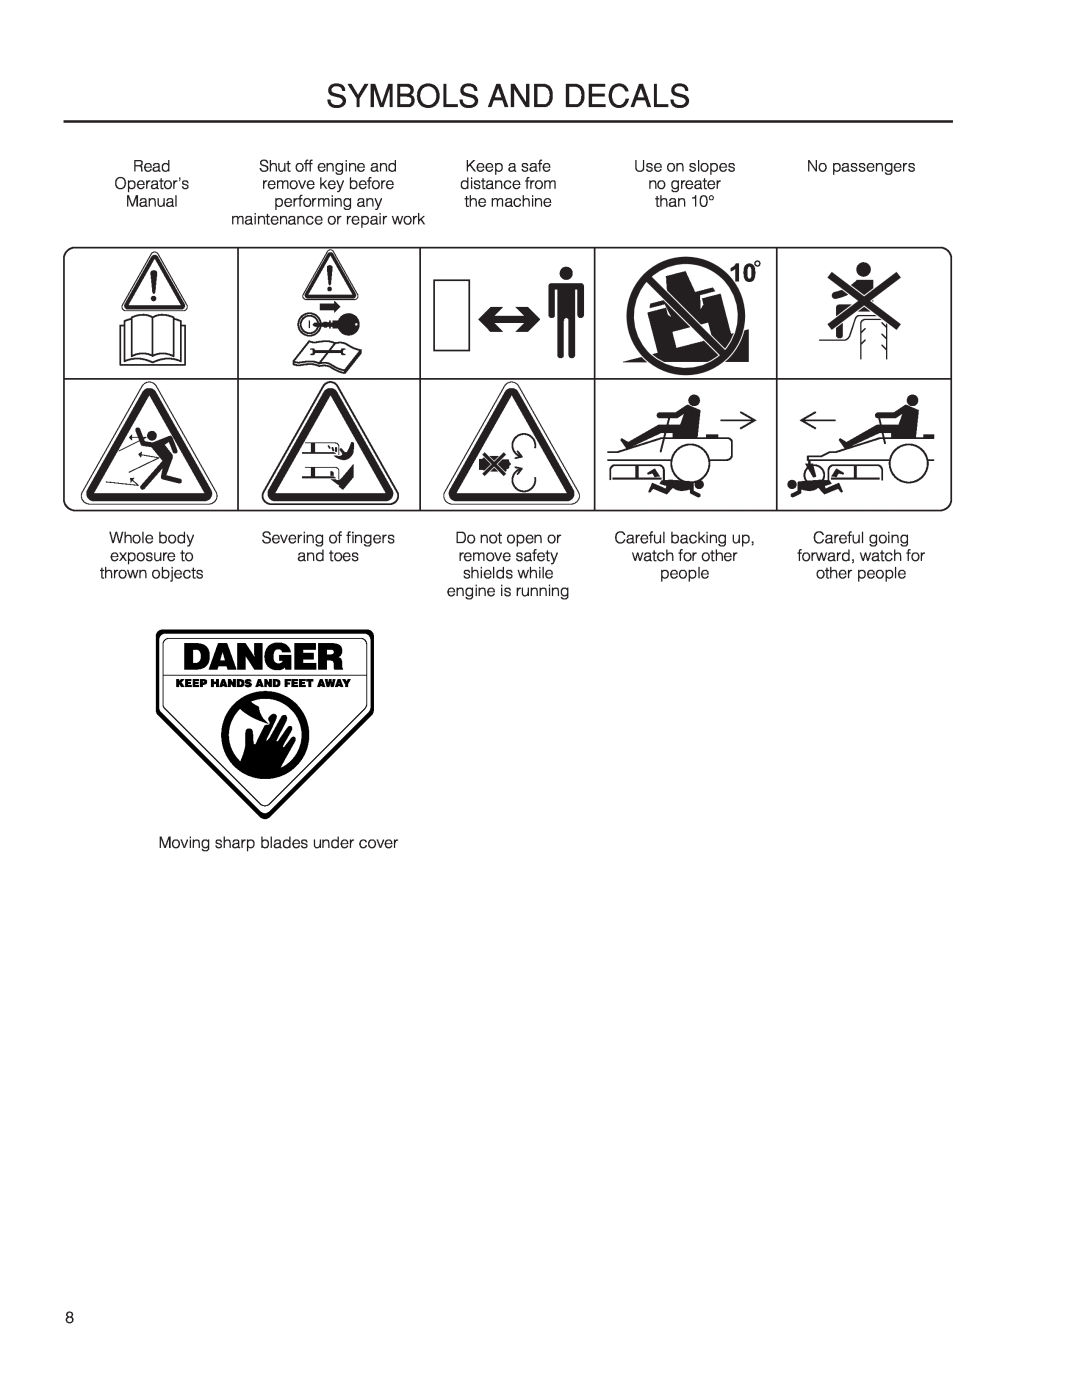 Dixon SPDZTR 30 BF symbols and decals, remove key before, performing any, Whole body, Careful backing up, remove safety 